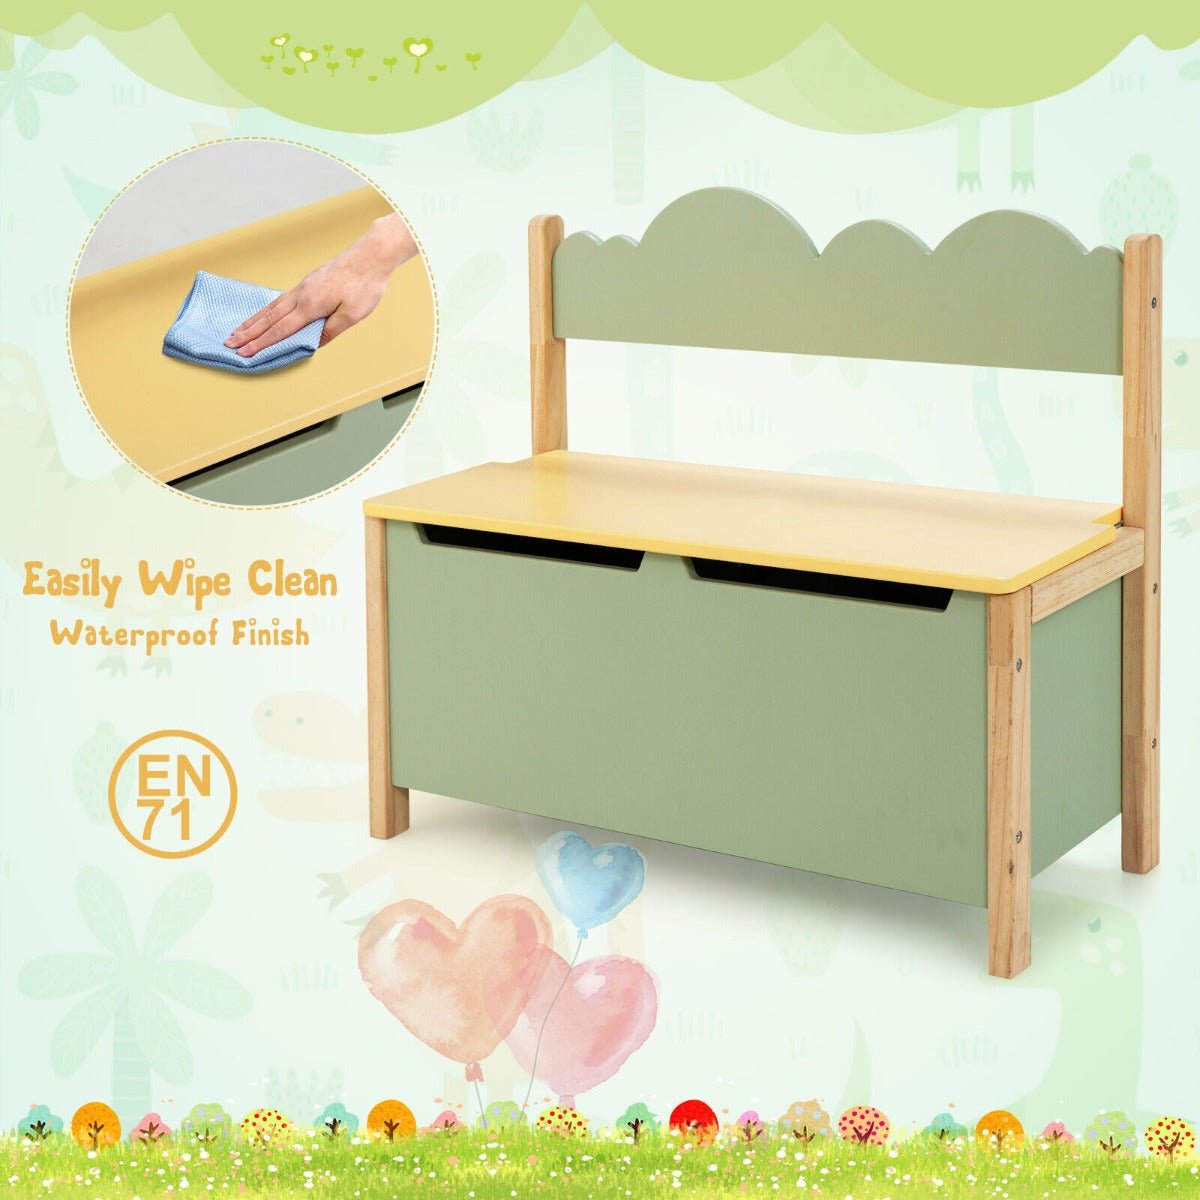 Children's Toy Storage Box - Safety Lid for Neat Playroom Organization